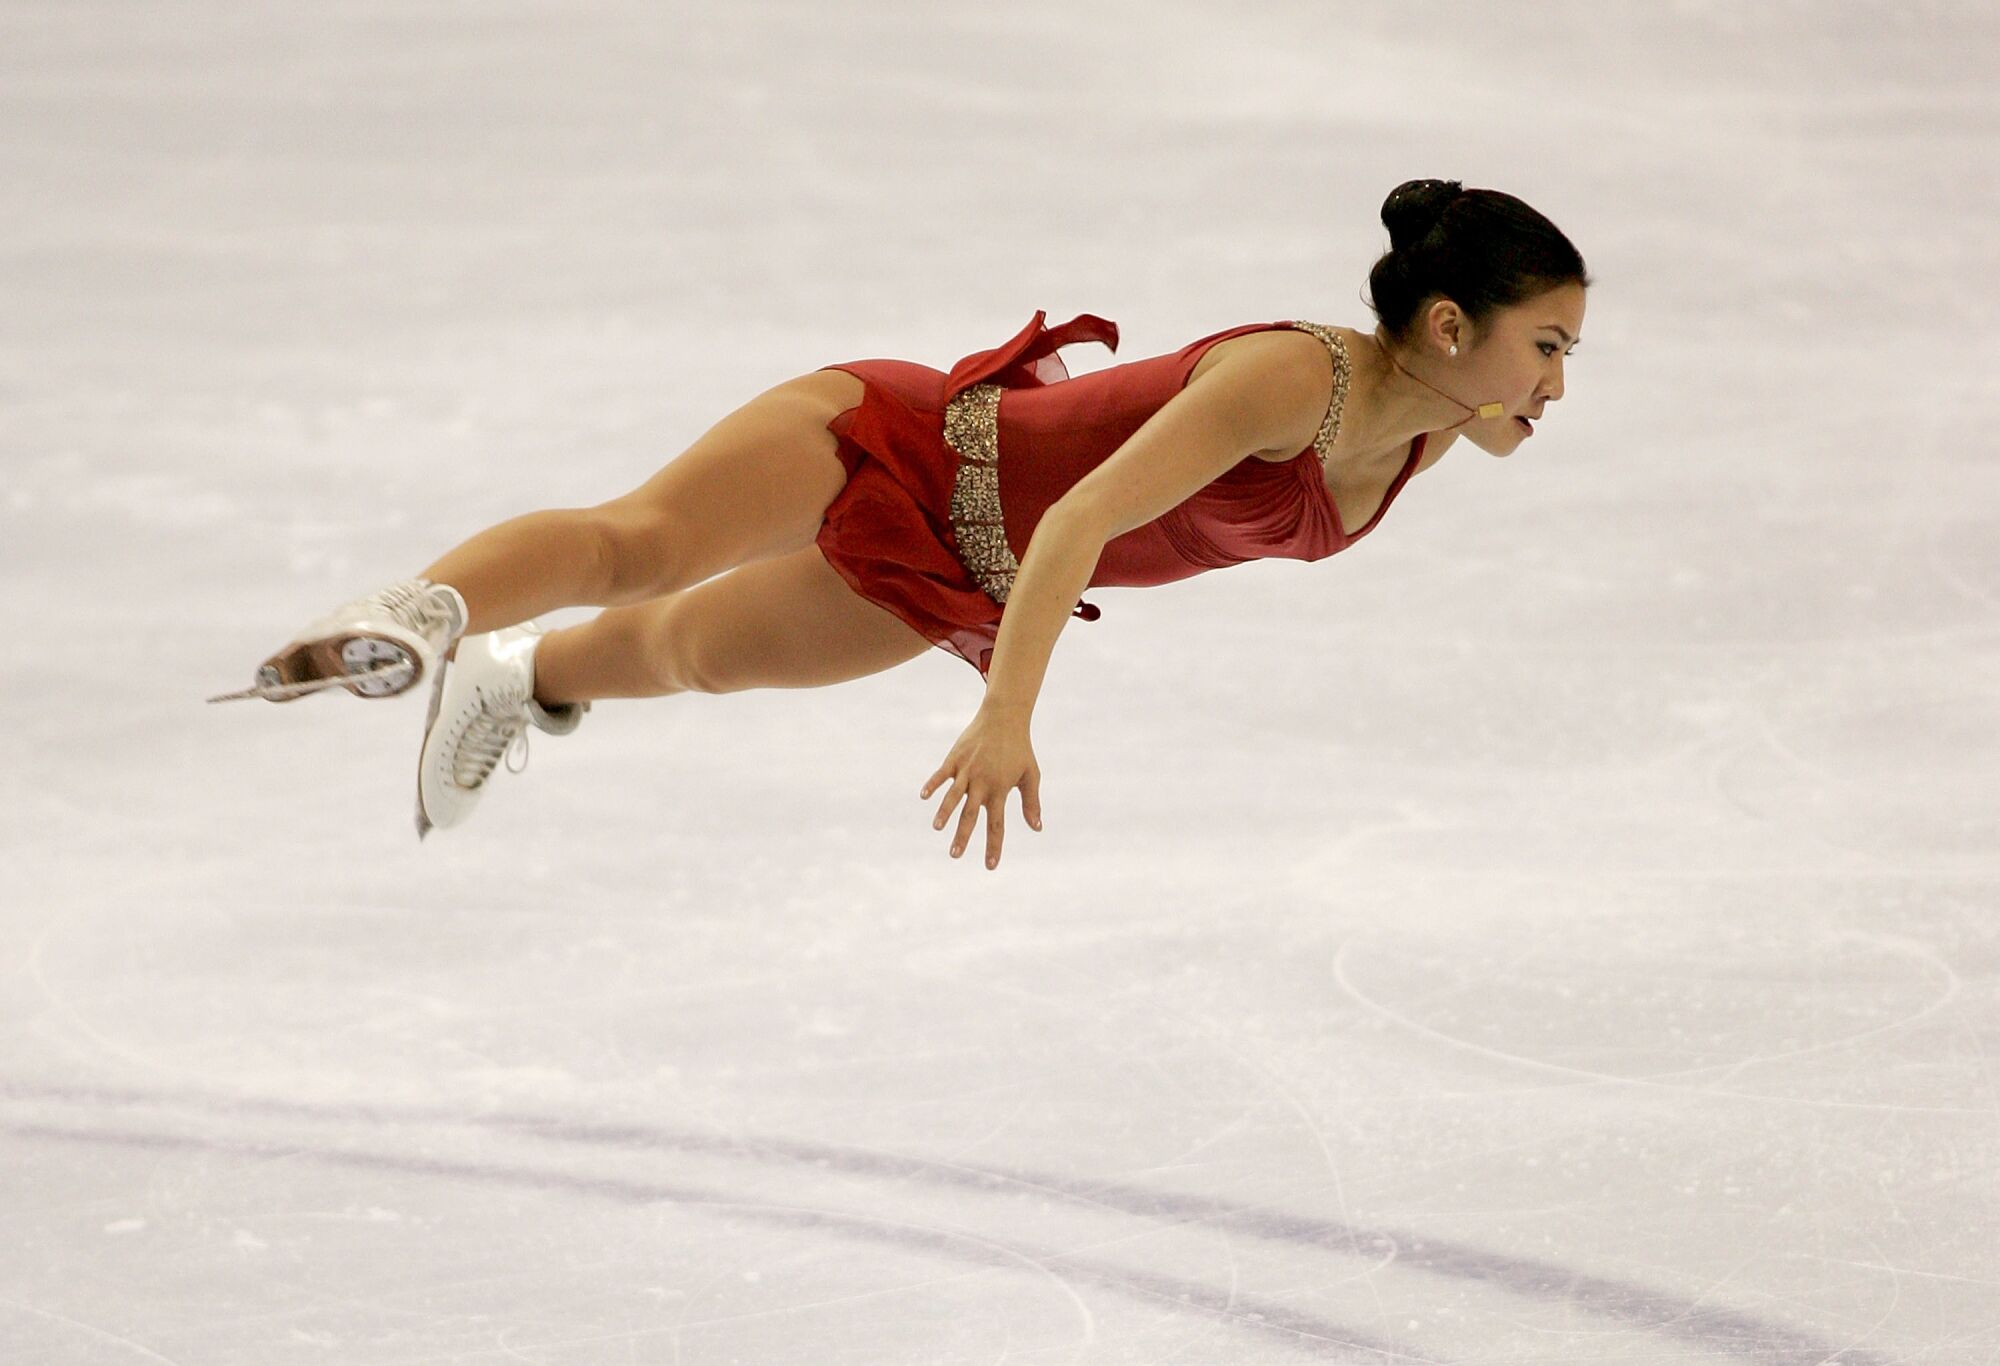 Michelle Kwan on the ice rink